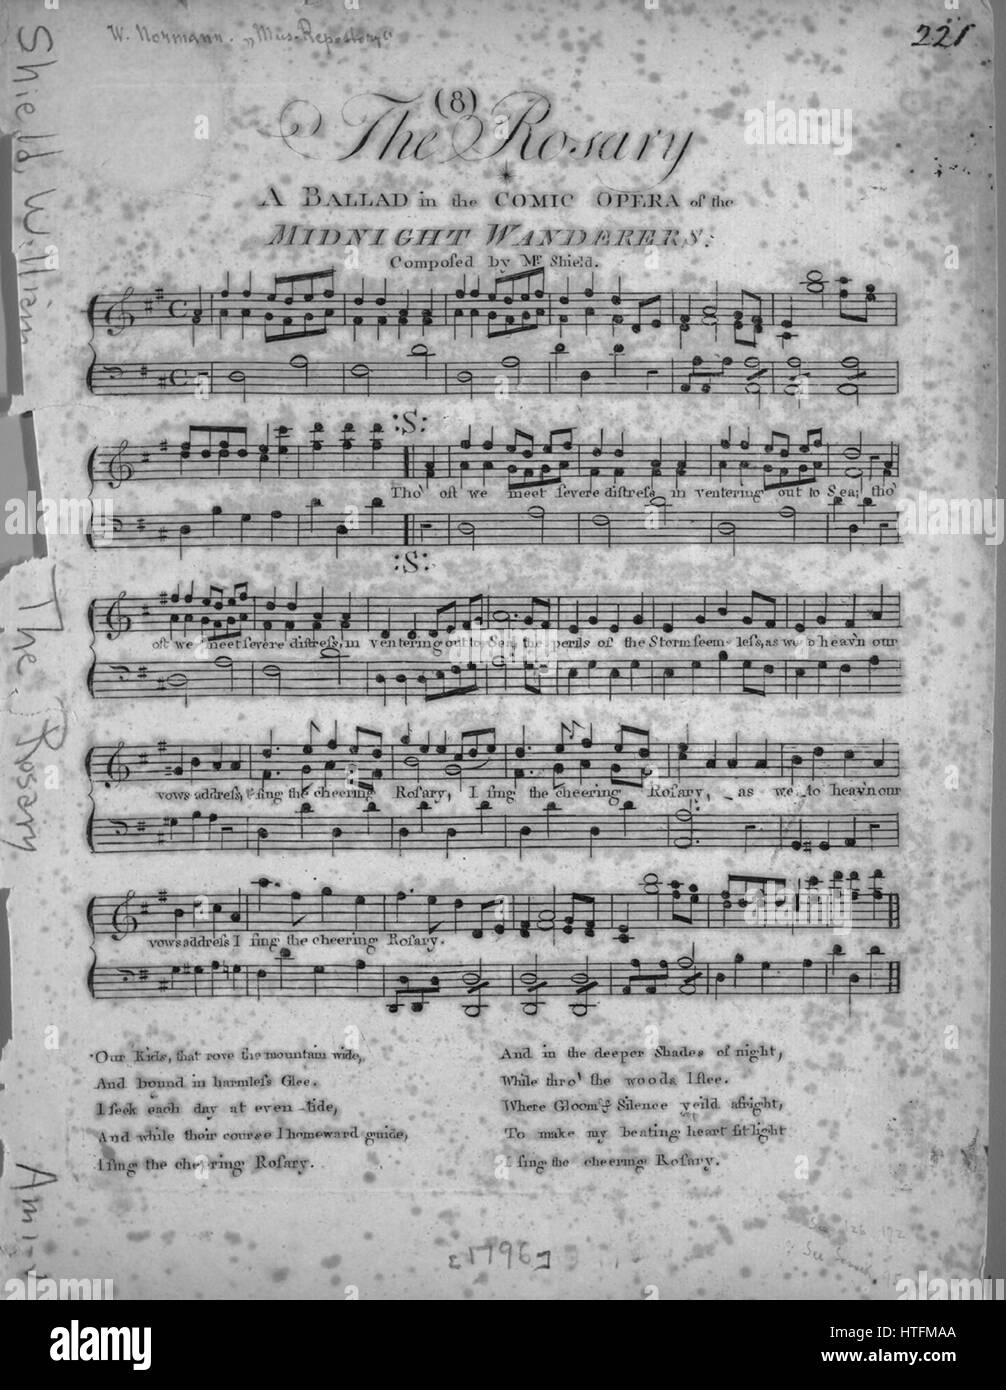 Sheet music cover image of the song 'The Rosary A Ballad in the Comic Opera of the Midnight Wanderers', with original authorship notes reading 'Composed by Mr Shield', 1796. The publisher is listed as 'n.p.', the form of composition is 'strophic with chorus', the instrumentation is 'piano and voice', the first line reads 'Tho' oft we meet severe distress in Ventering [sic] out to Sea', and the illustration artist is listed as 'None'. Stock Photo